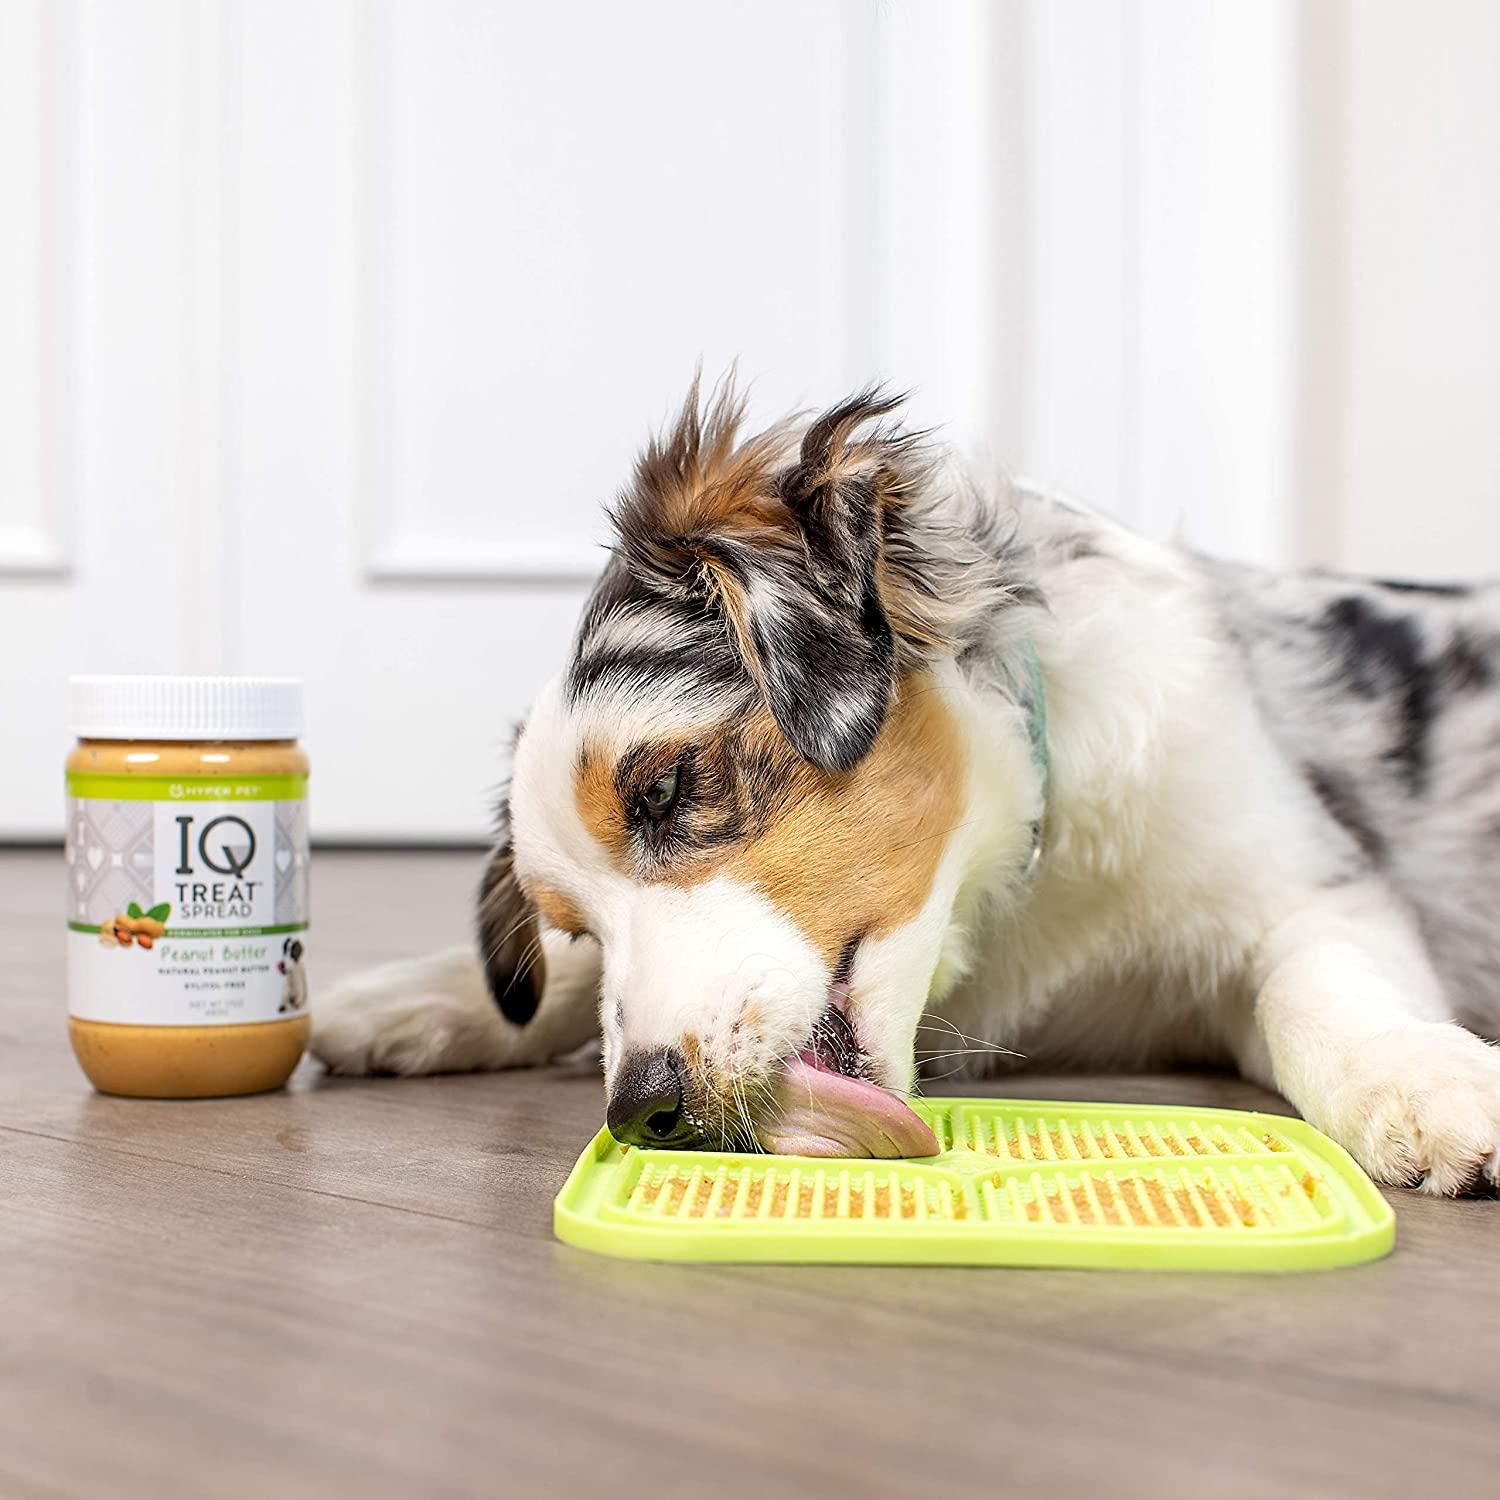 Hyper Pet IQ Dog Lick Mats Are Great for Meals, Boredom, and Anxiety